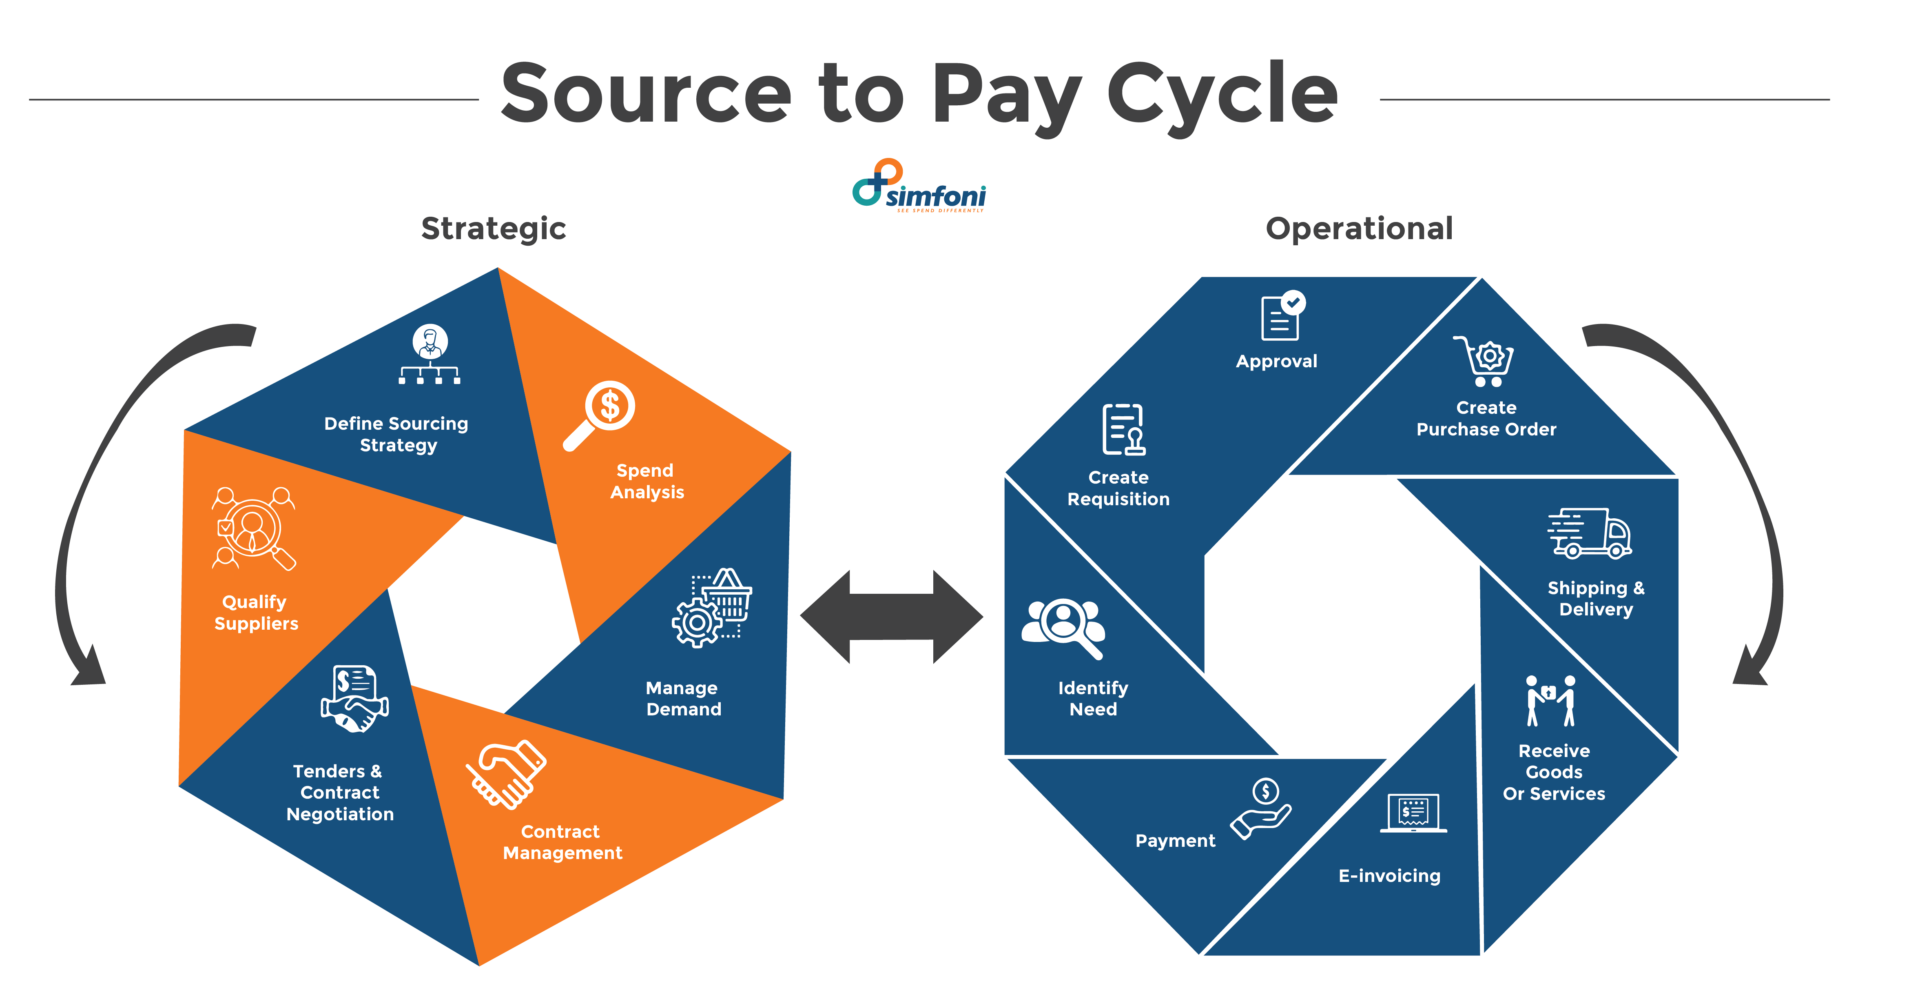 Source to Pay Cycle